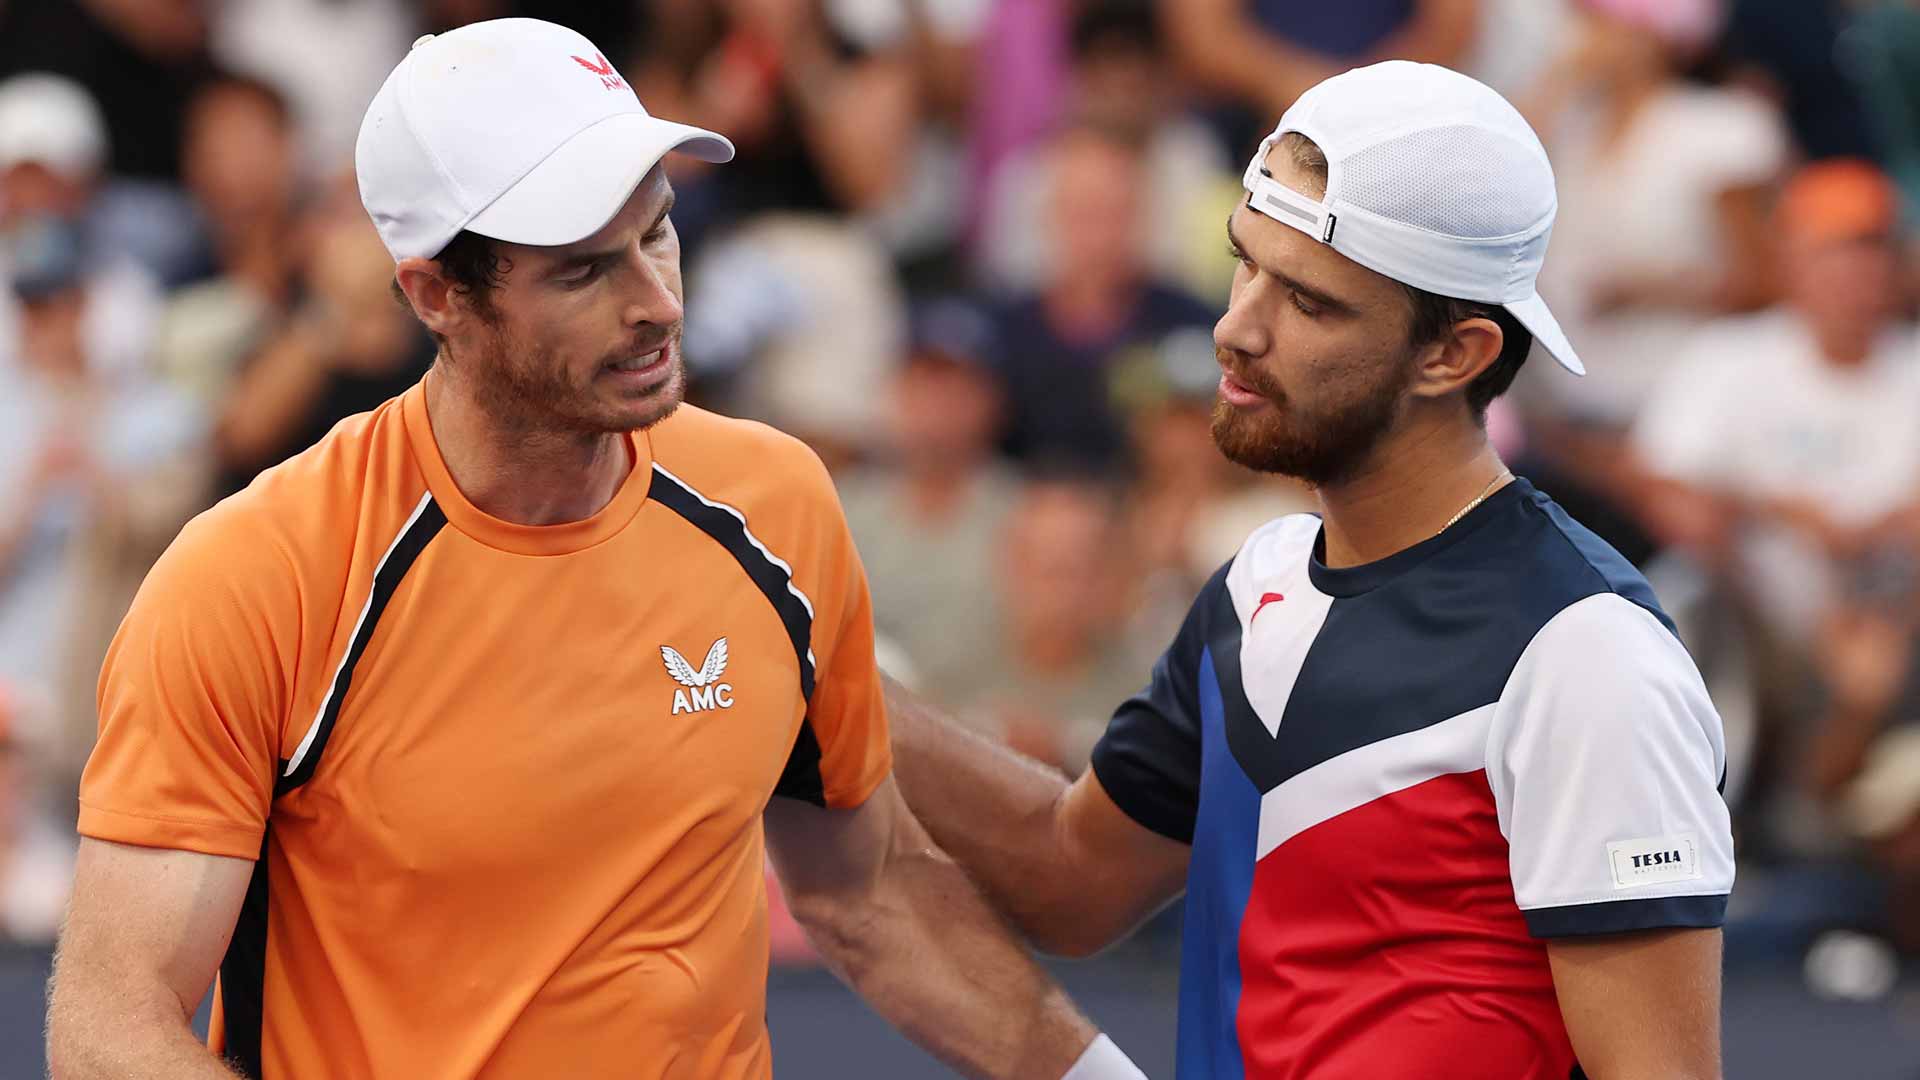 Andy Murray and Tomas Machac last met earlier this year in a marathon clash in Miami.